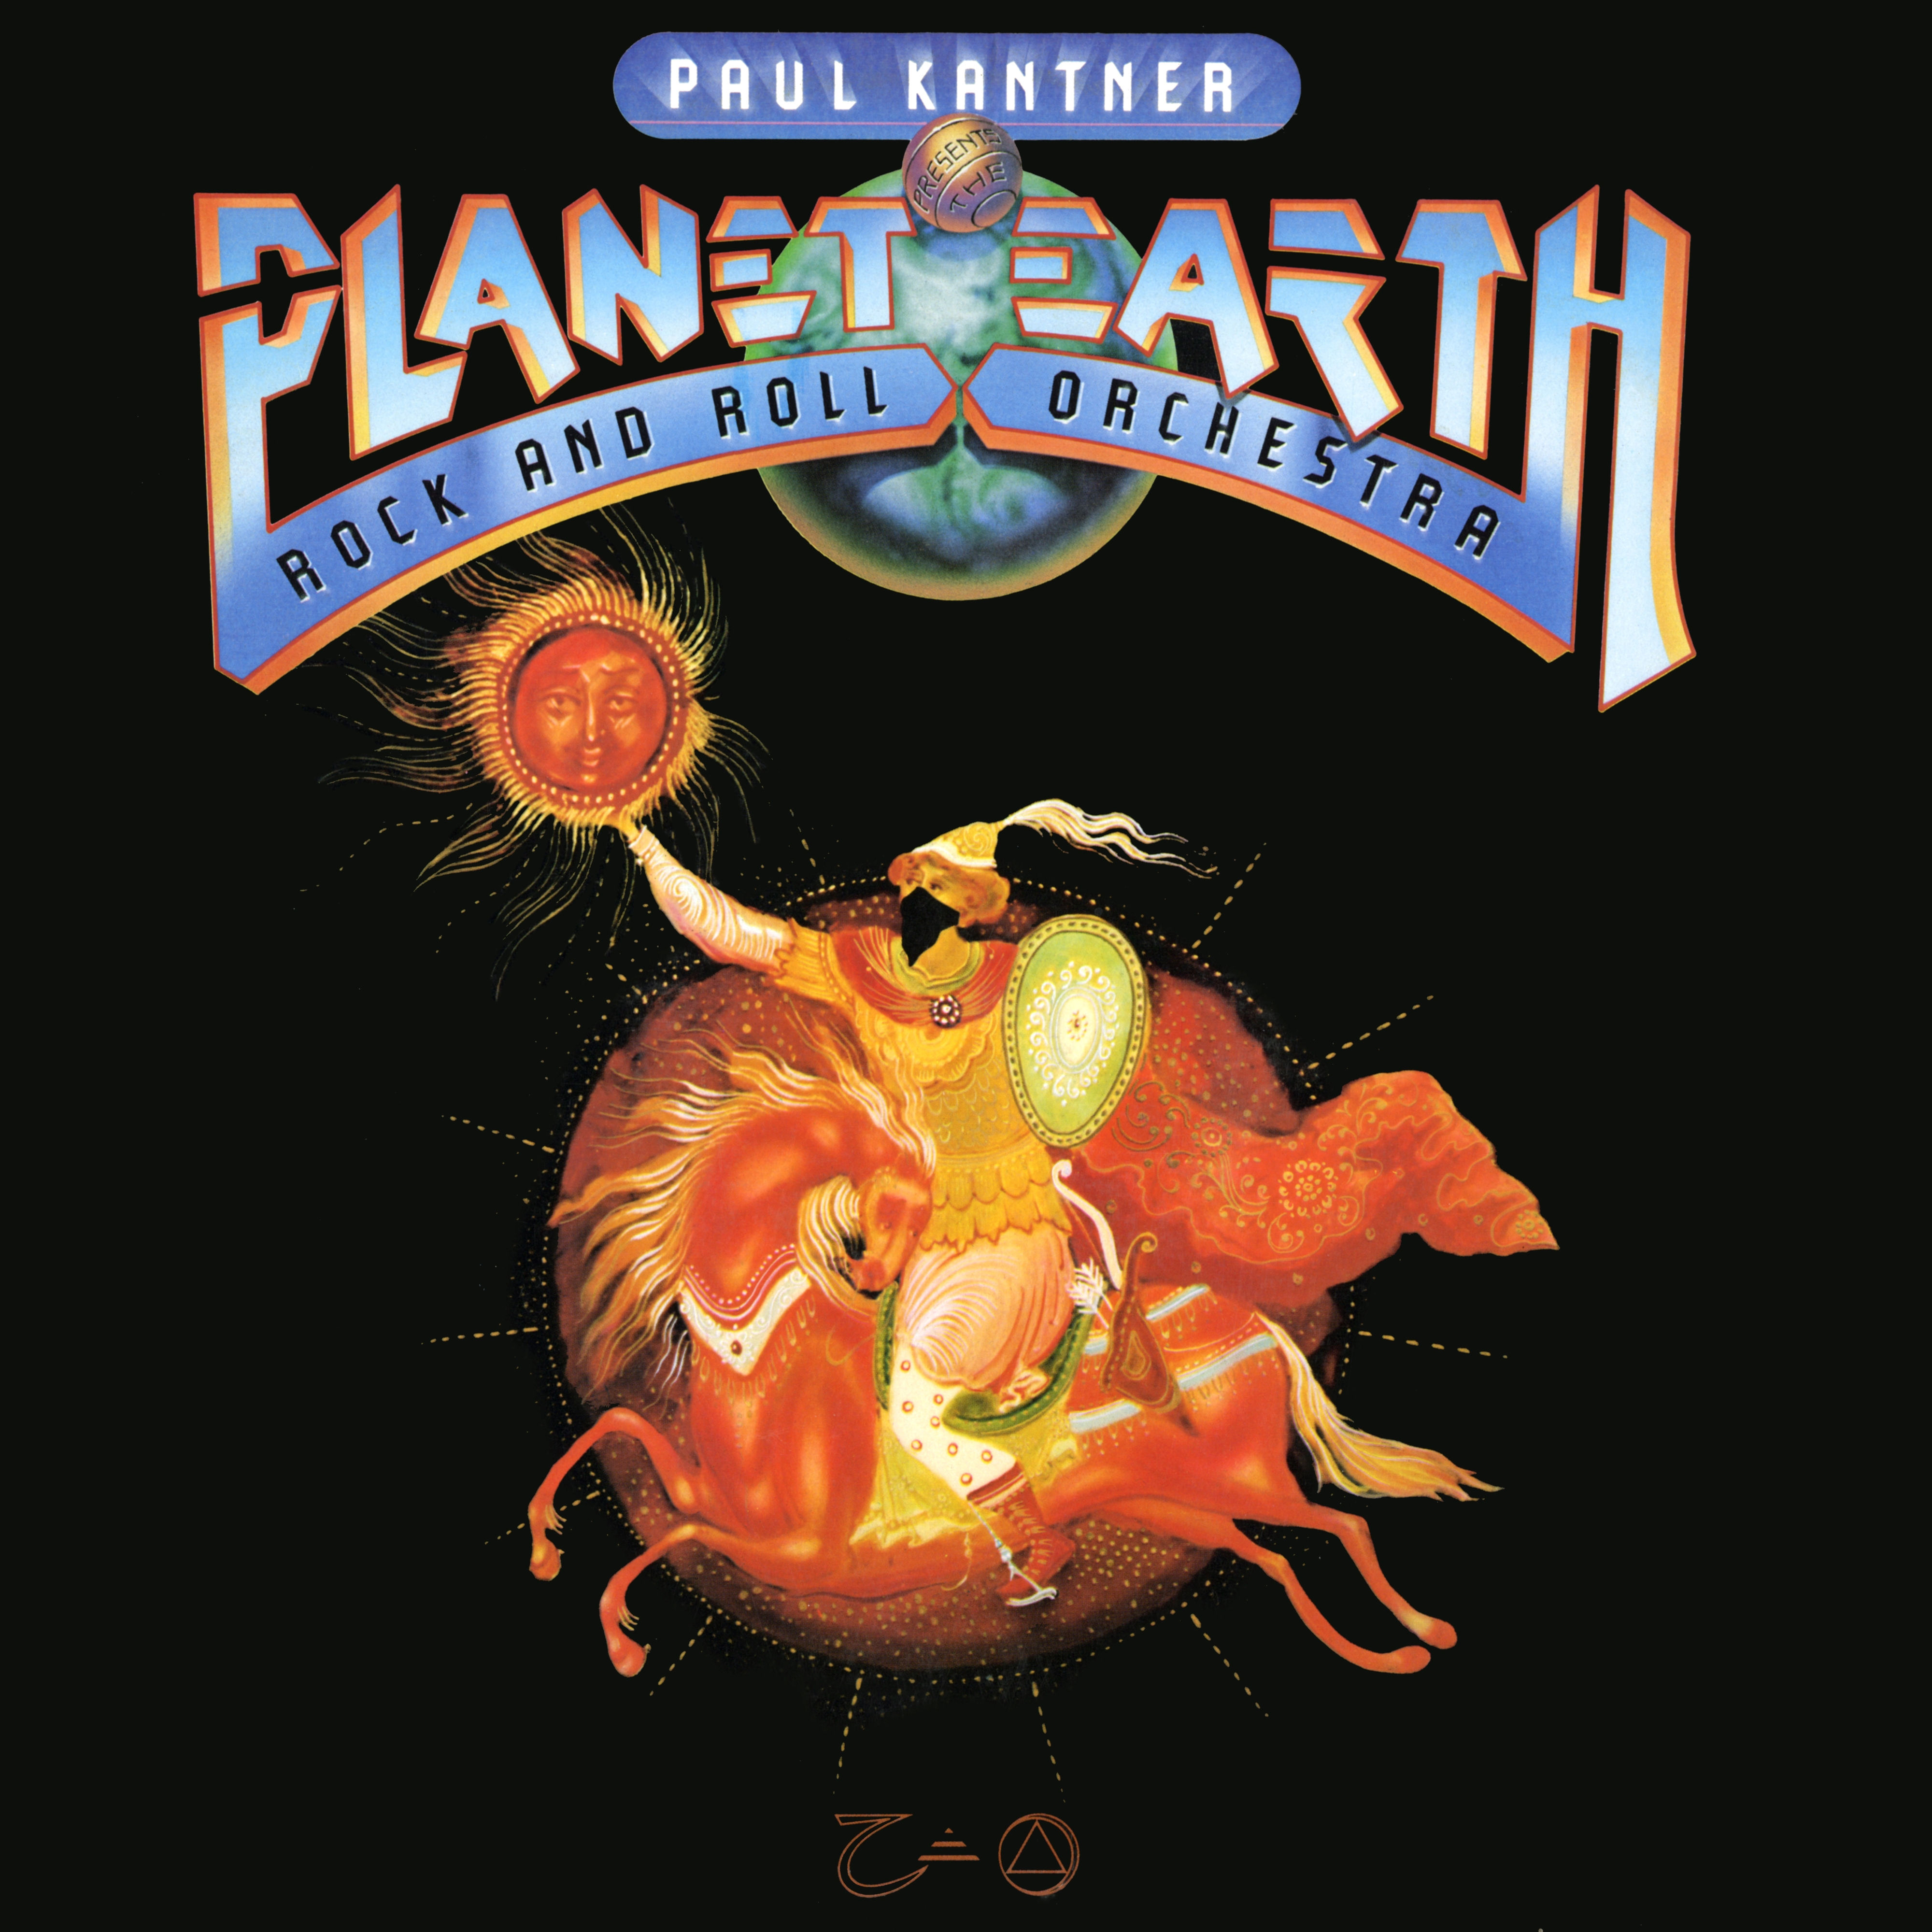 Paul Kantner – Planet Earth Rock and Roll Orchestra (2021) [FLAC 24bit/192kHz]